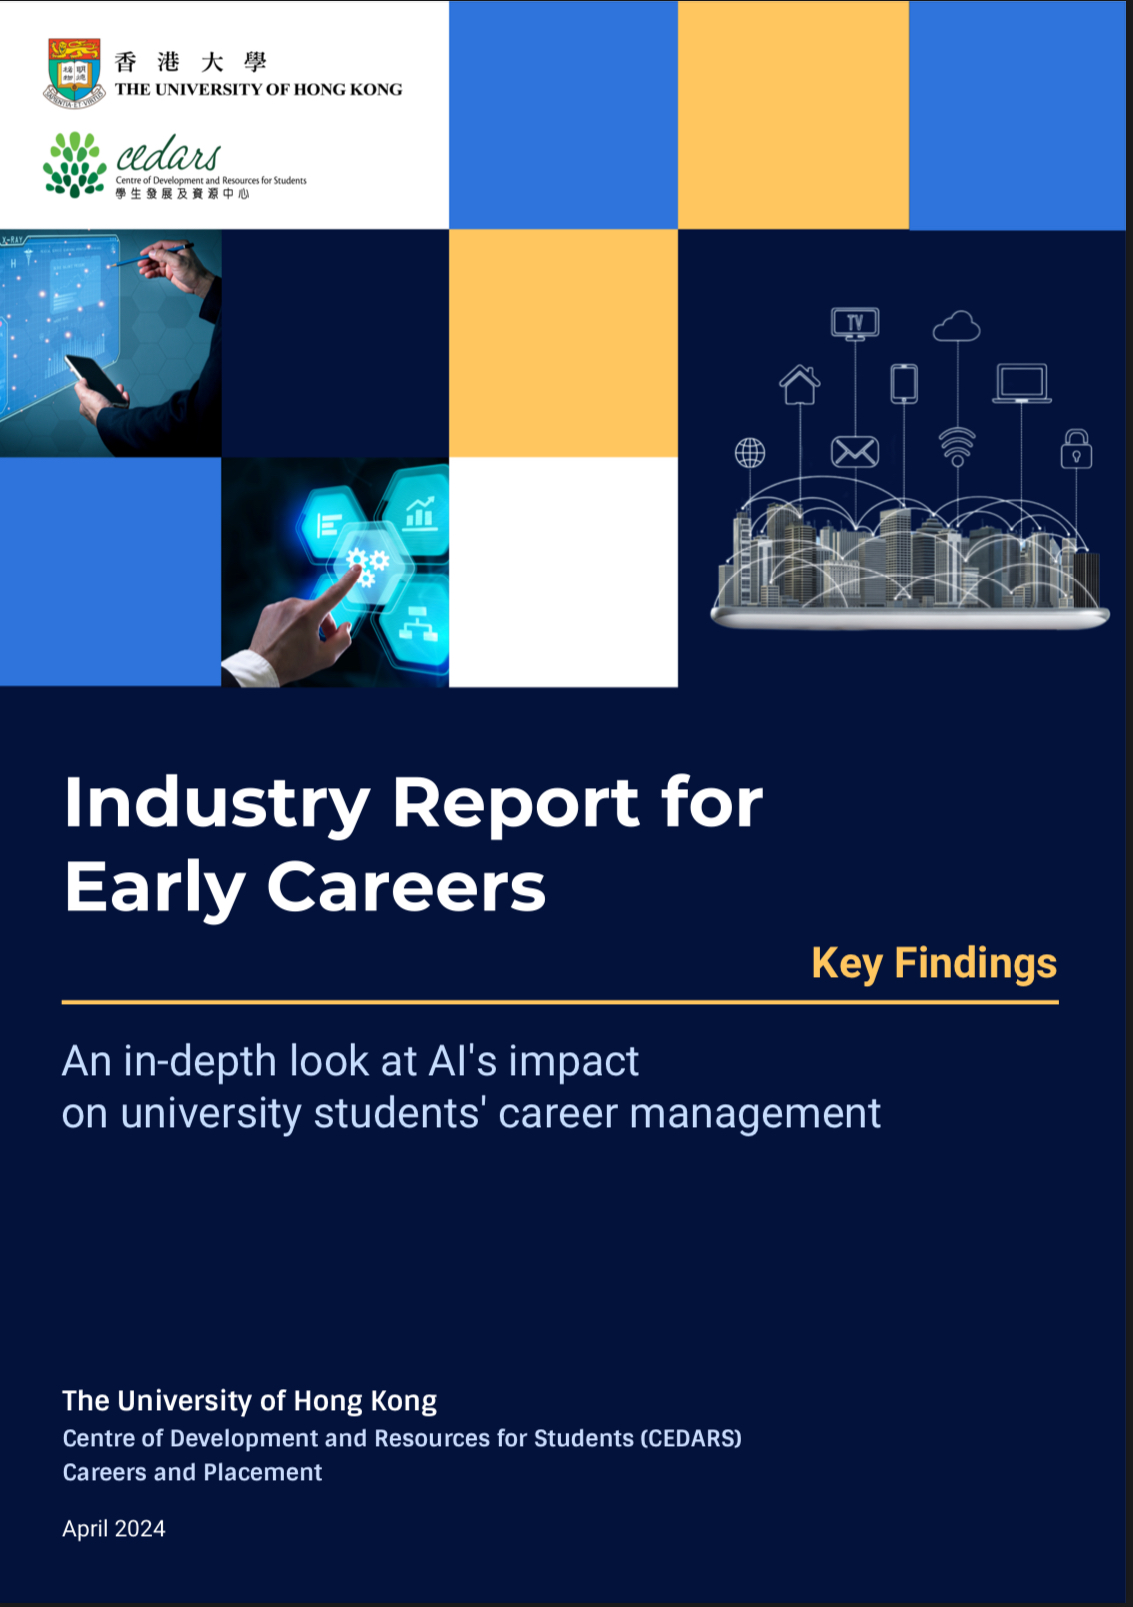 HKU Industry Report for Early Careers - An in-depth look at AI’s impact on university students’ career management